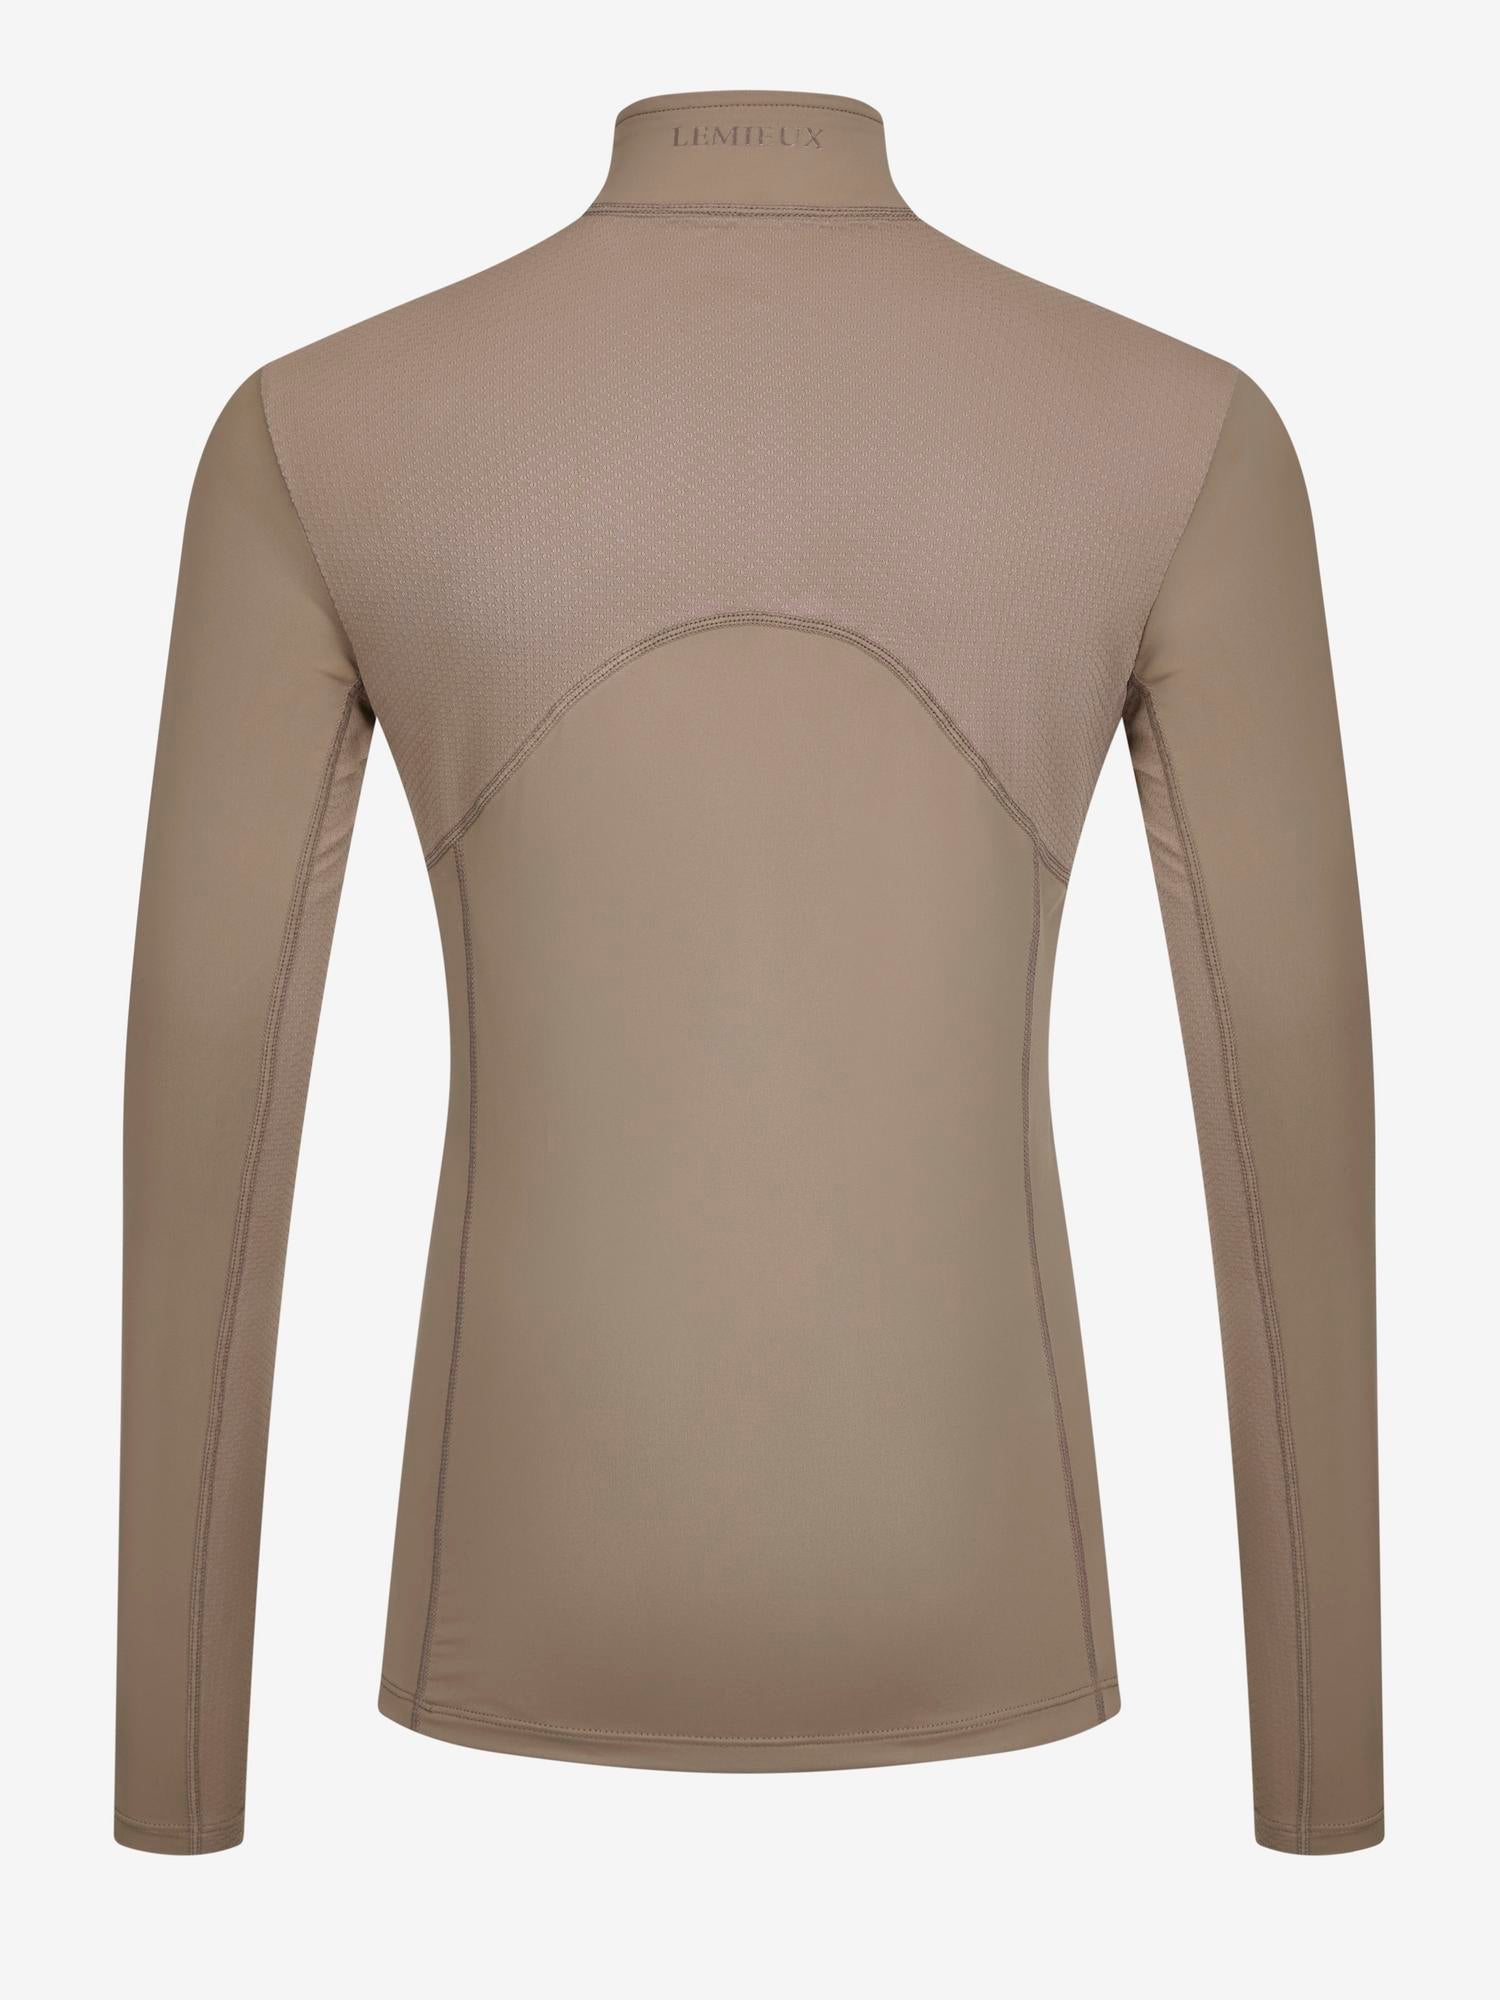 LeMieux Young Riders Mia Mesh Base Layer